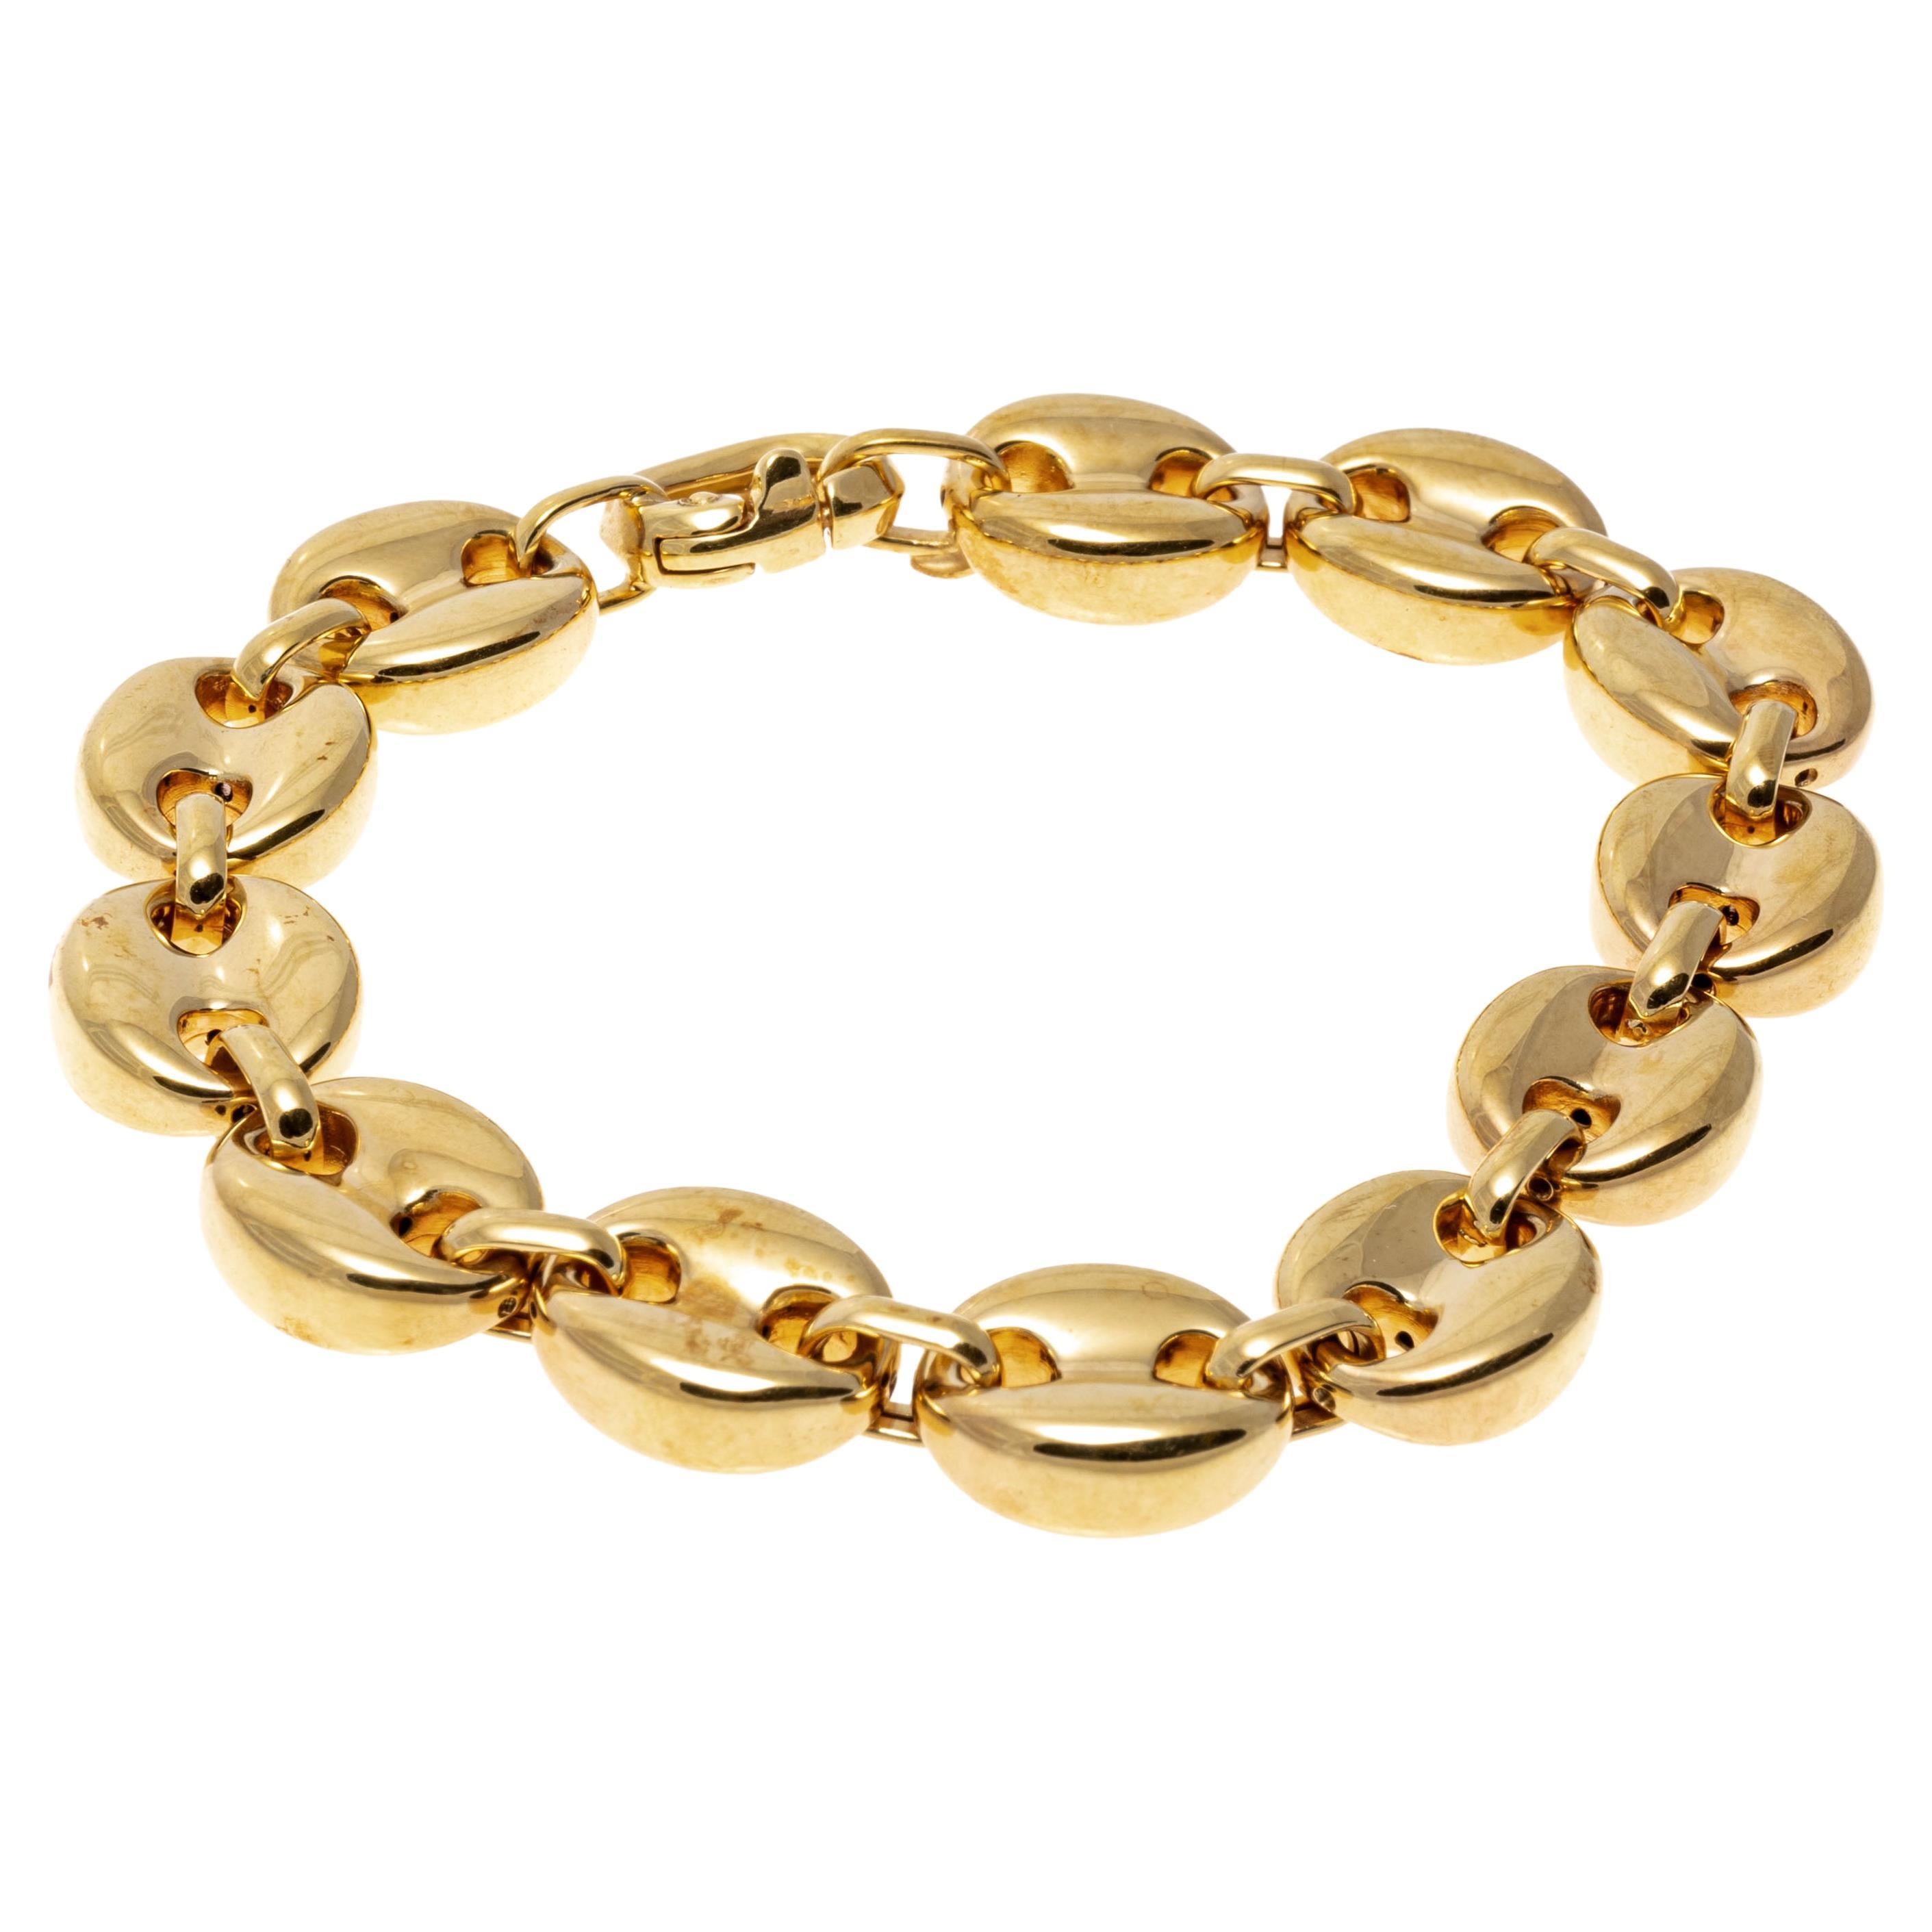 MARINER ITALIAN CHAIN Solid Yellow Gold 18K men's bracelet 8.5" MADE IN ITALY 